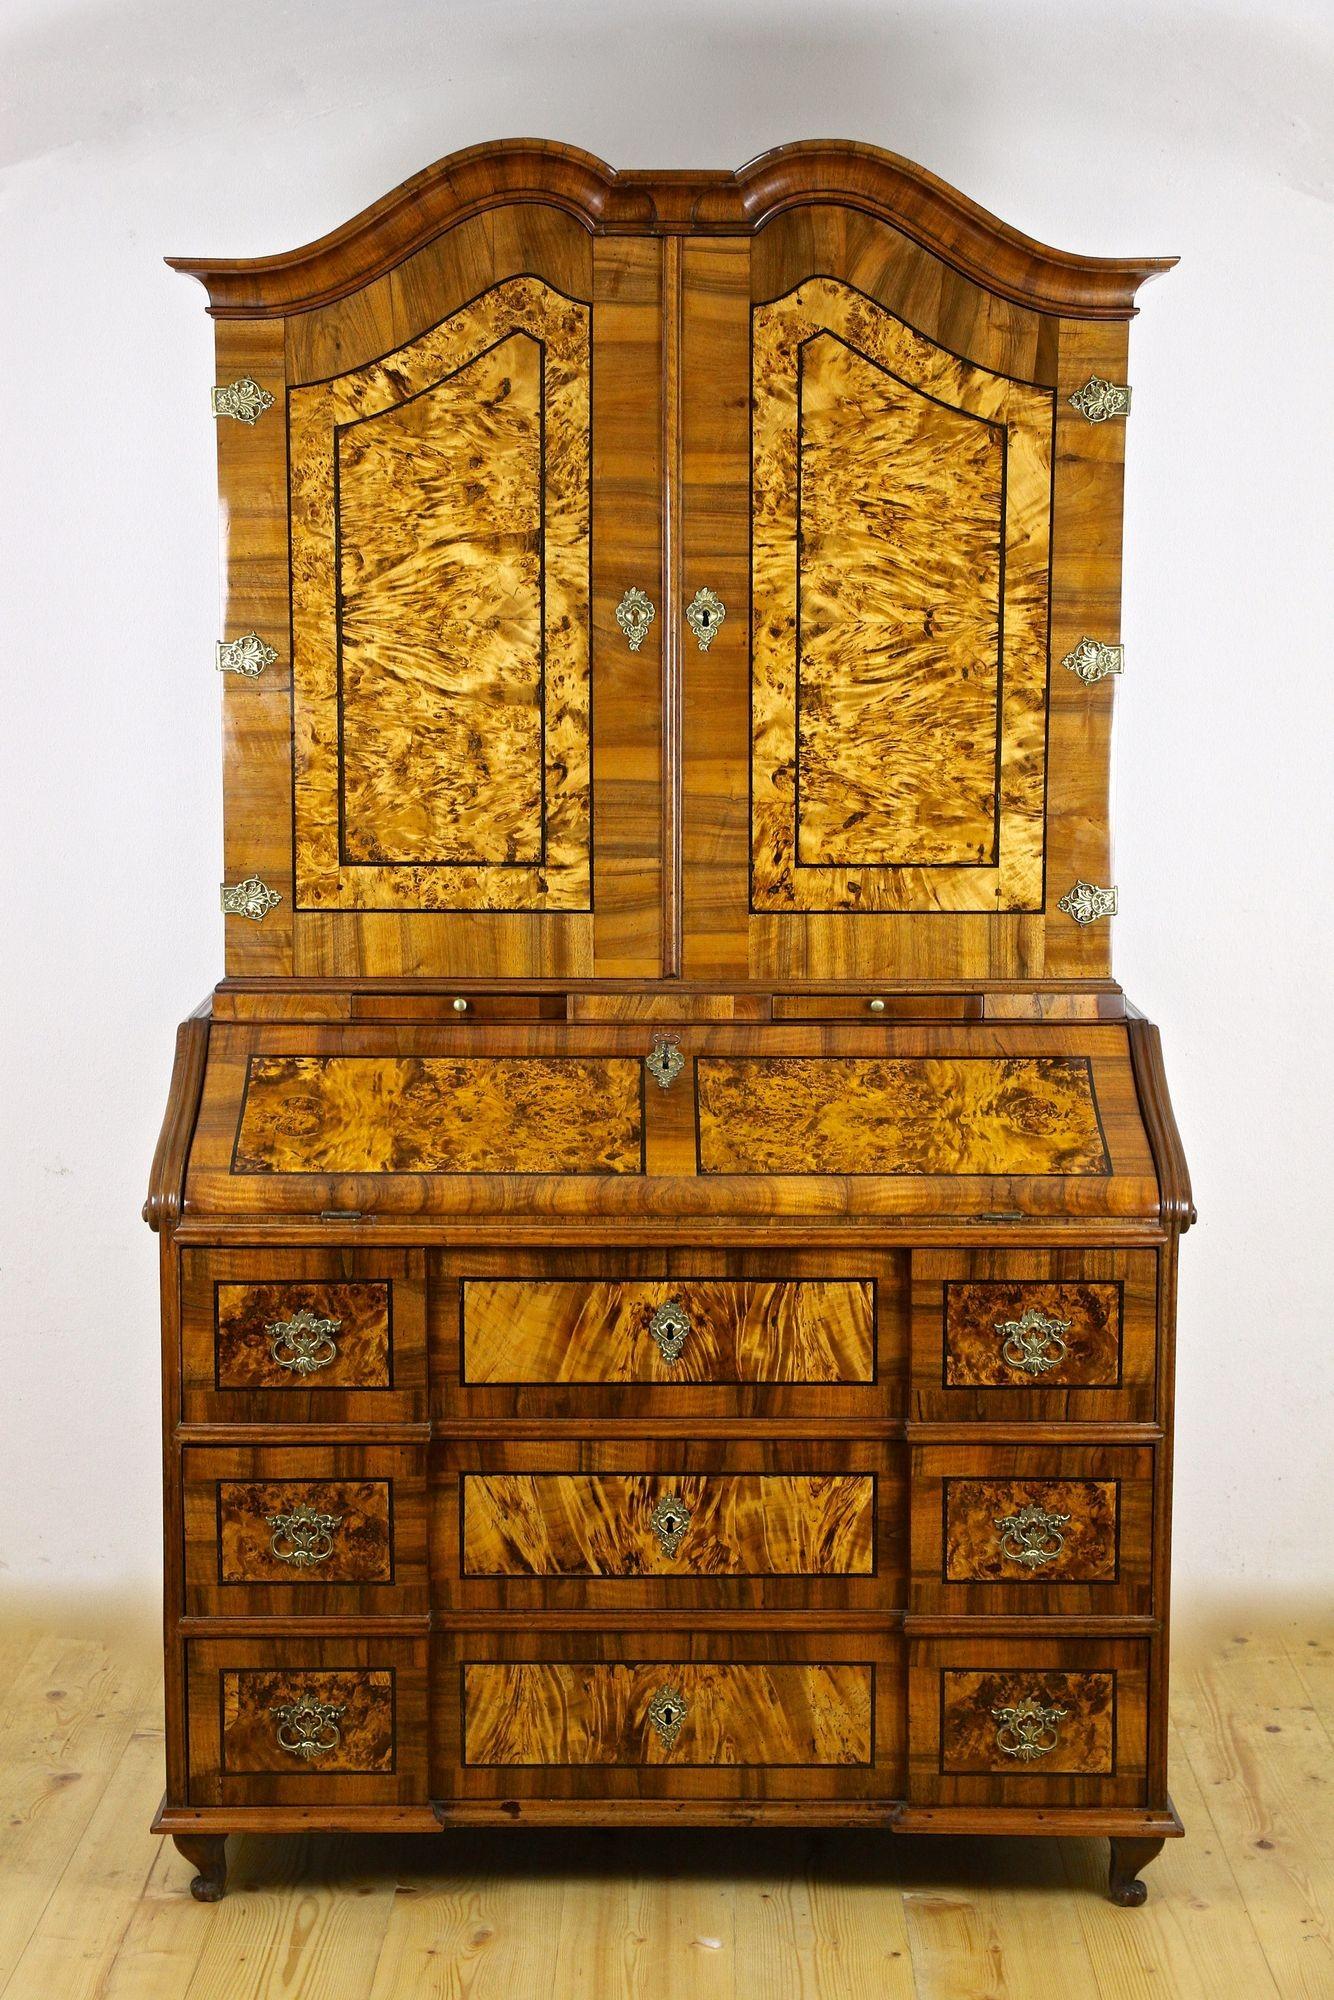 Important 18th century secrétaire or writing cabinet elaborately made in the baroque period in West Germany around 1770. Different kinds of fine nutwood/ walnut were used to set up a very unique design. Fantastic looking fields of rarely used